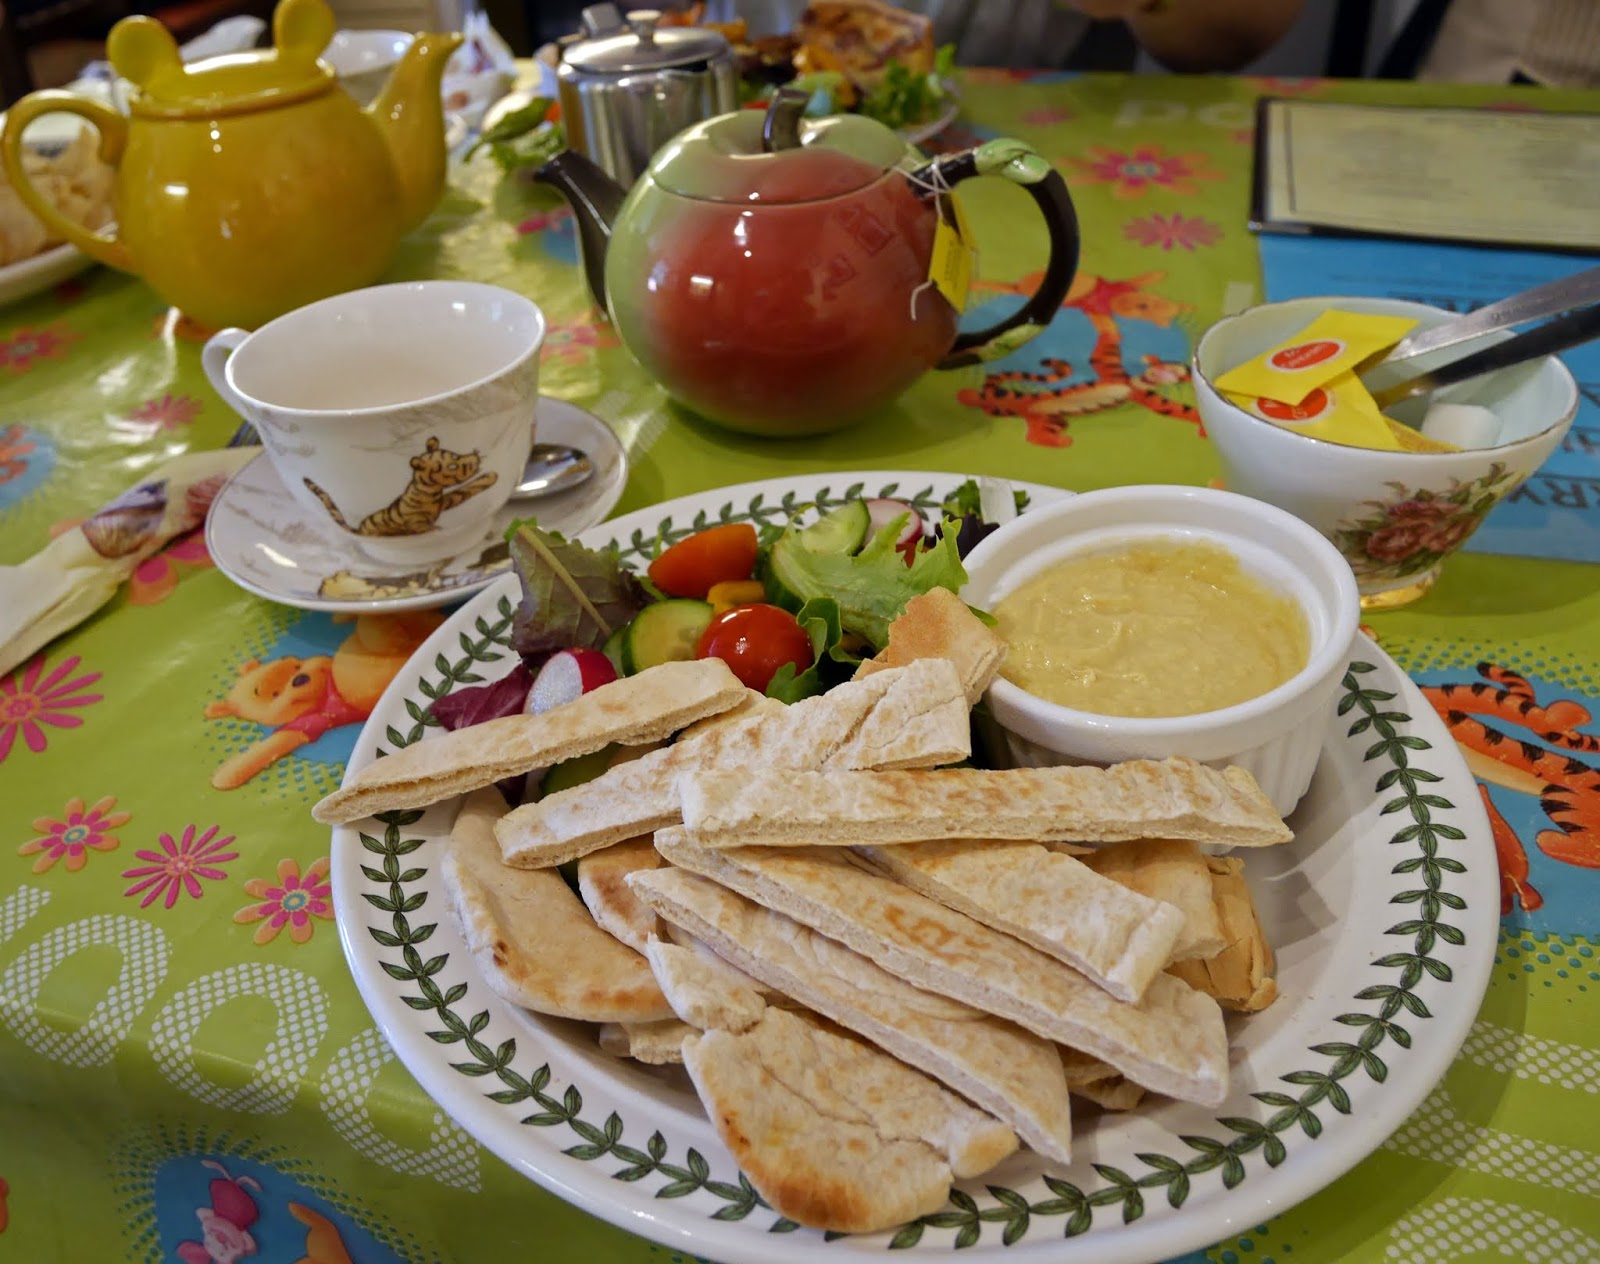 Hummus and pitta bread for lunch at Piglet's Tearoom, Ashdown Forest